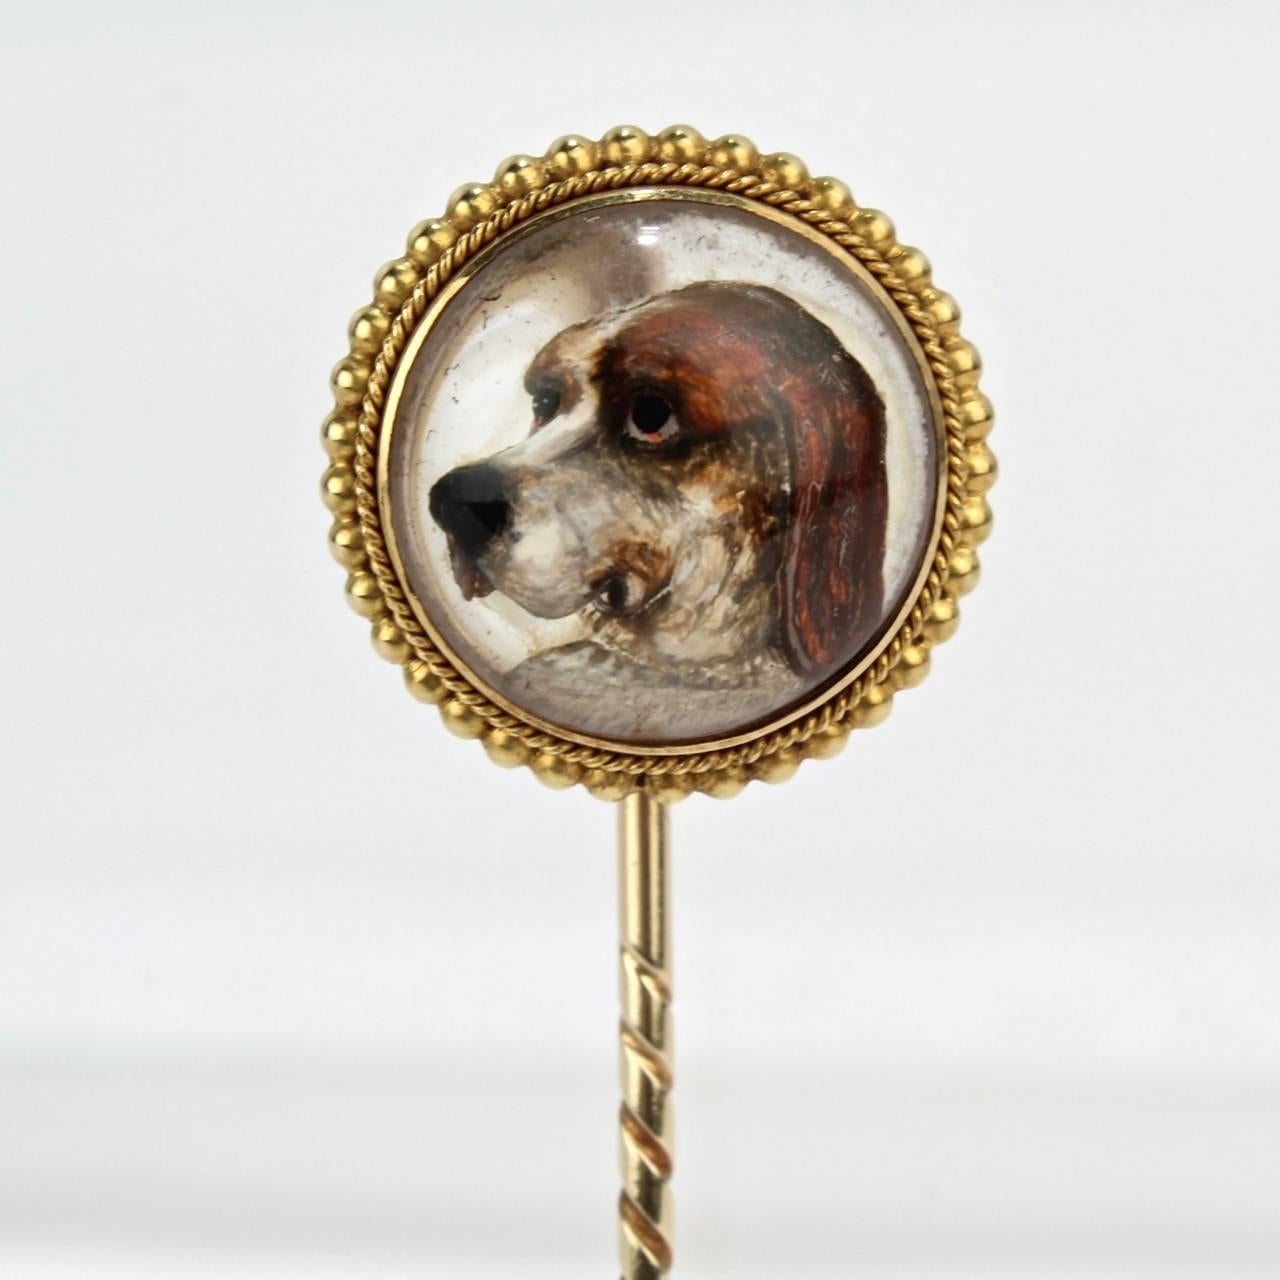 A good essex crystal and gold stick pin with a depiction of a beagle dog's head in three-quarter profile.

The convex crystal surrounded in a beaded mount. 

Width: ca. 3/4 in.
Length: ca. 3 1/8 in.

Items purchased from David Sterner Antiques must